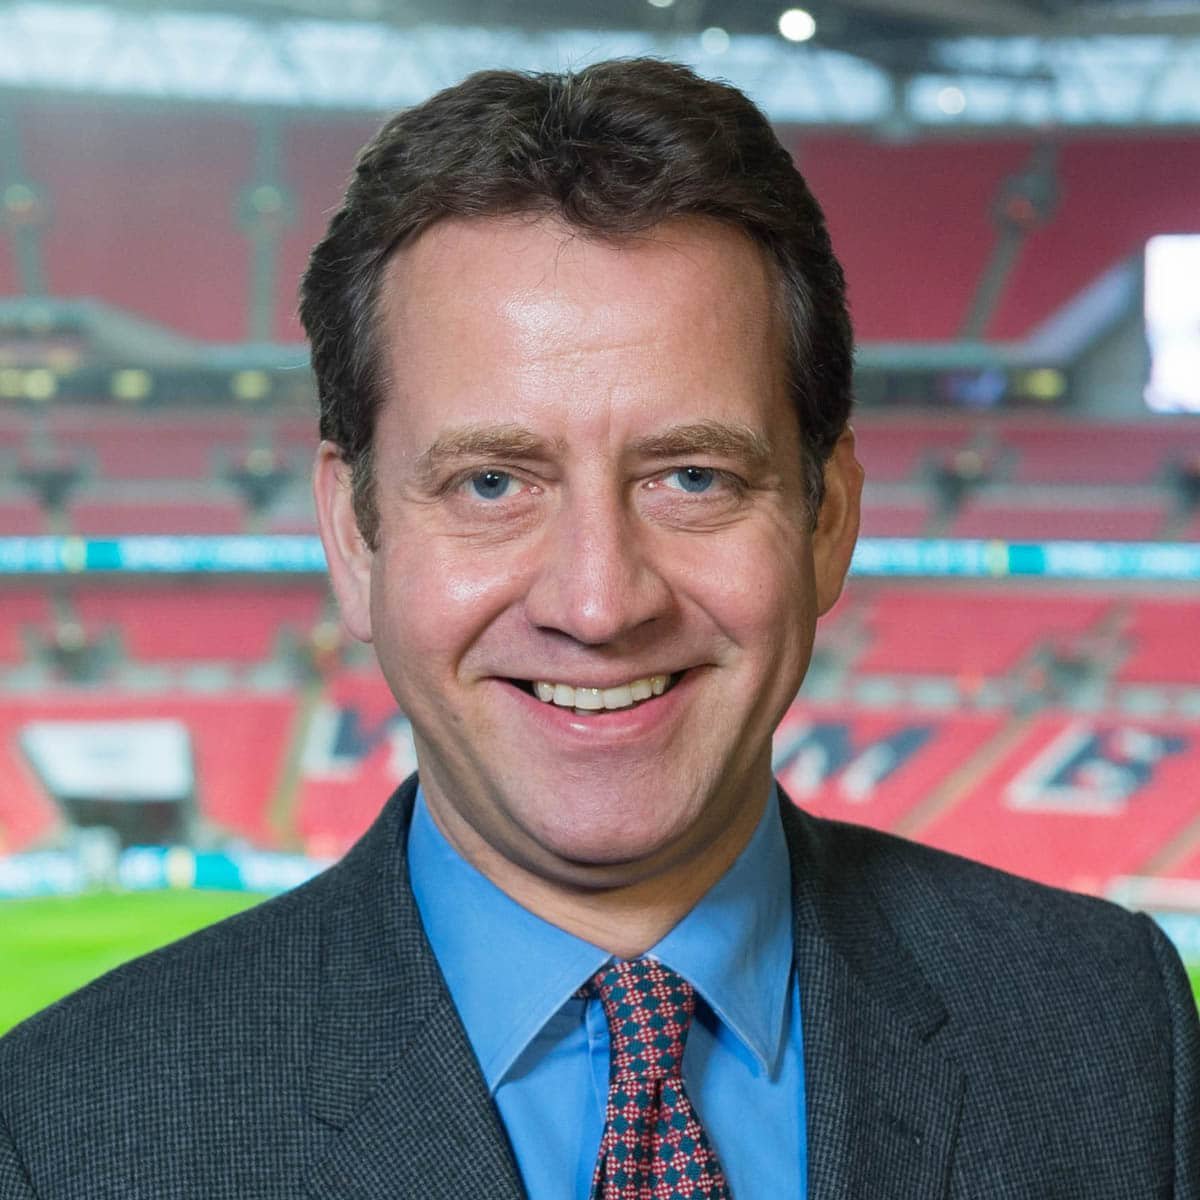 Mark-Pougatch-Hire ITV-football-soccer-anchor-presenter-host-tennis-rugby-at-Great-British-Speakers